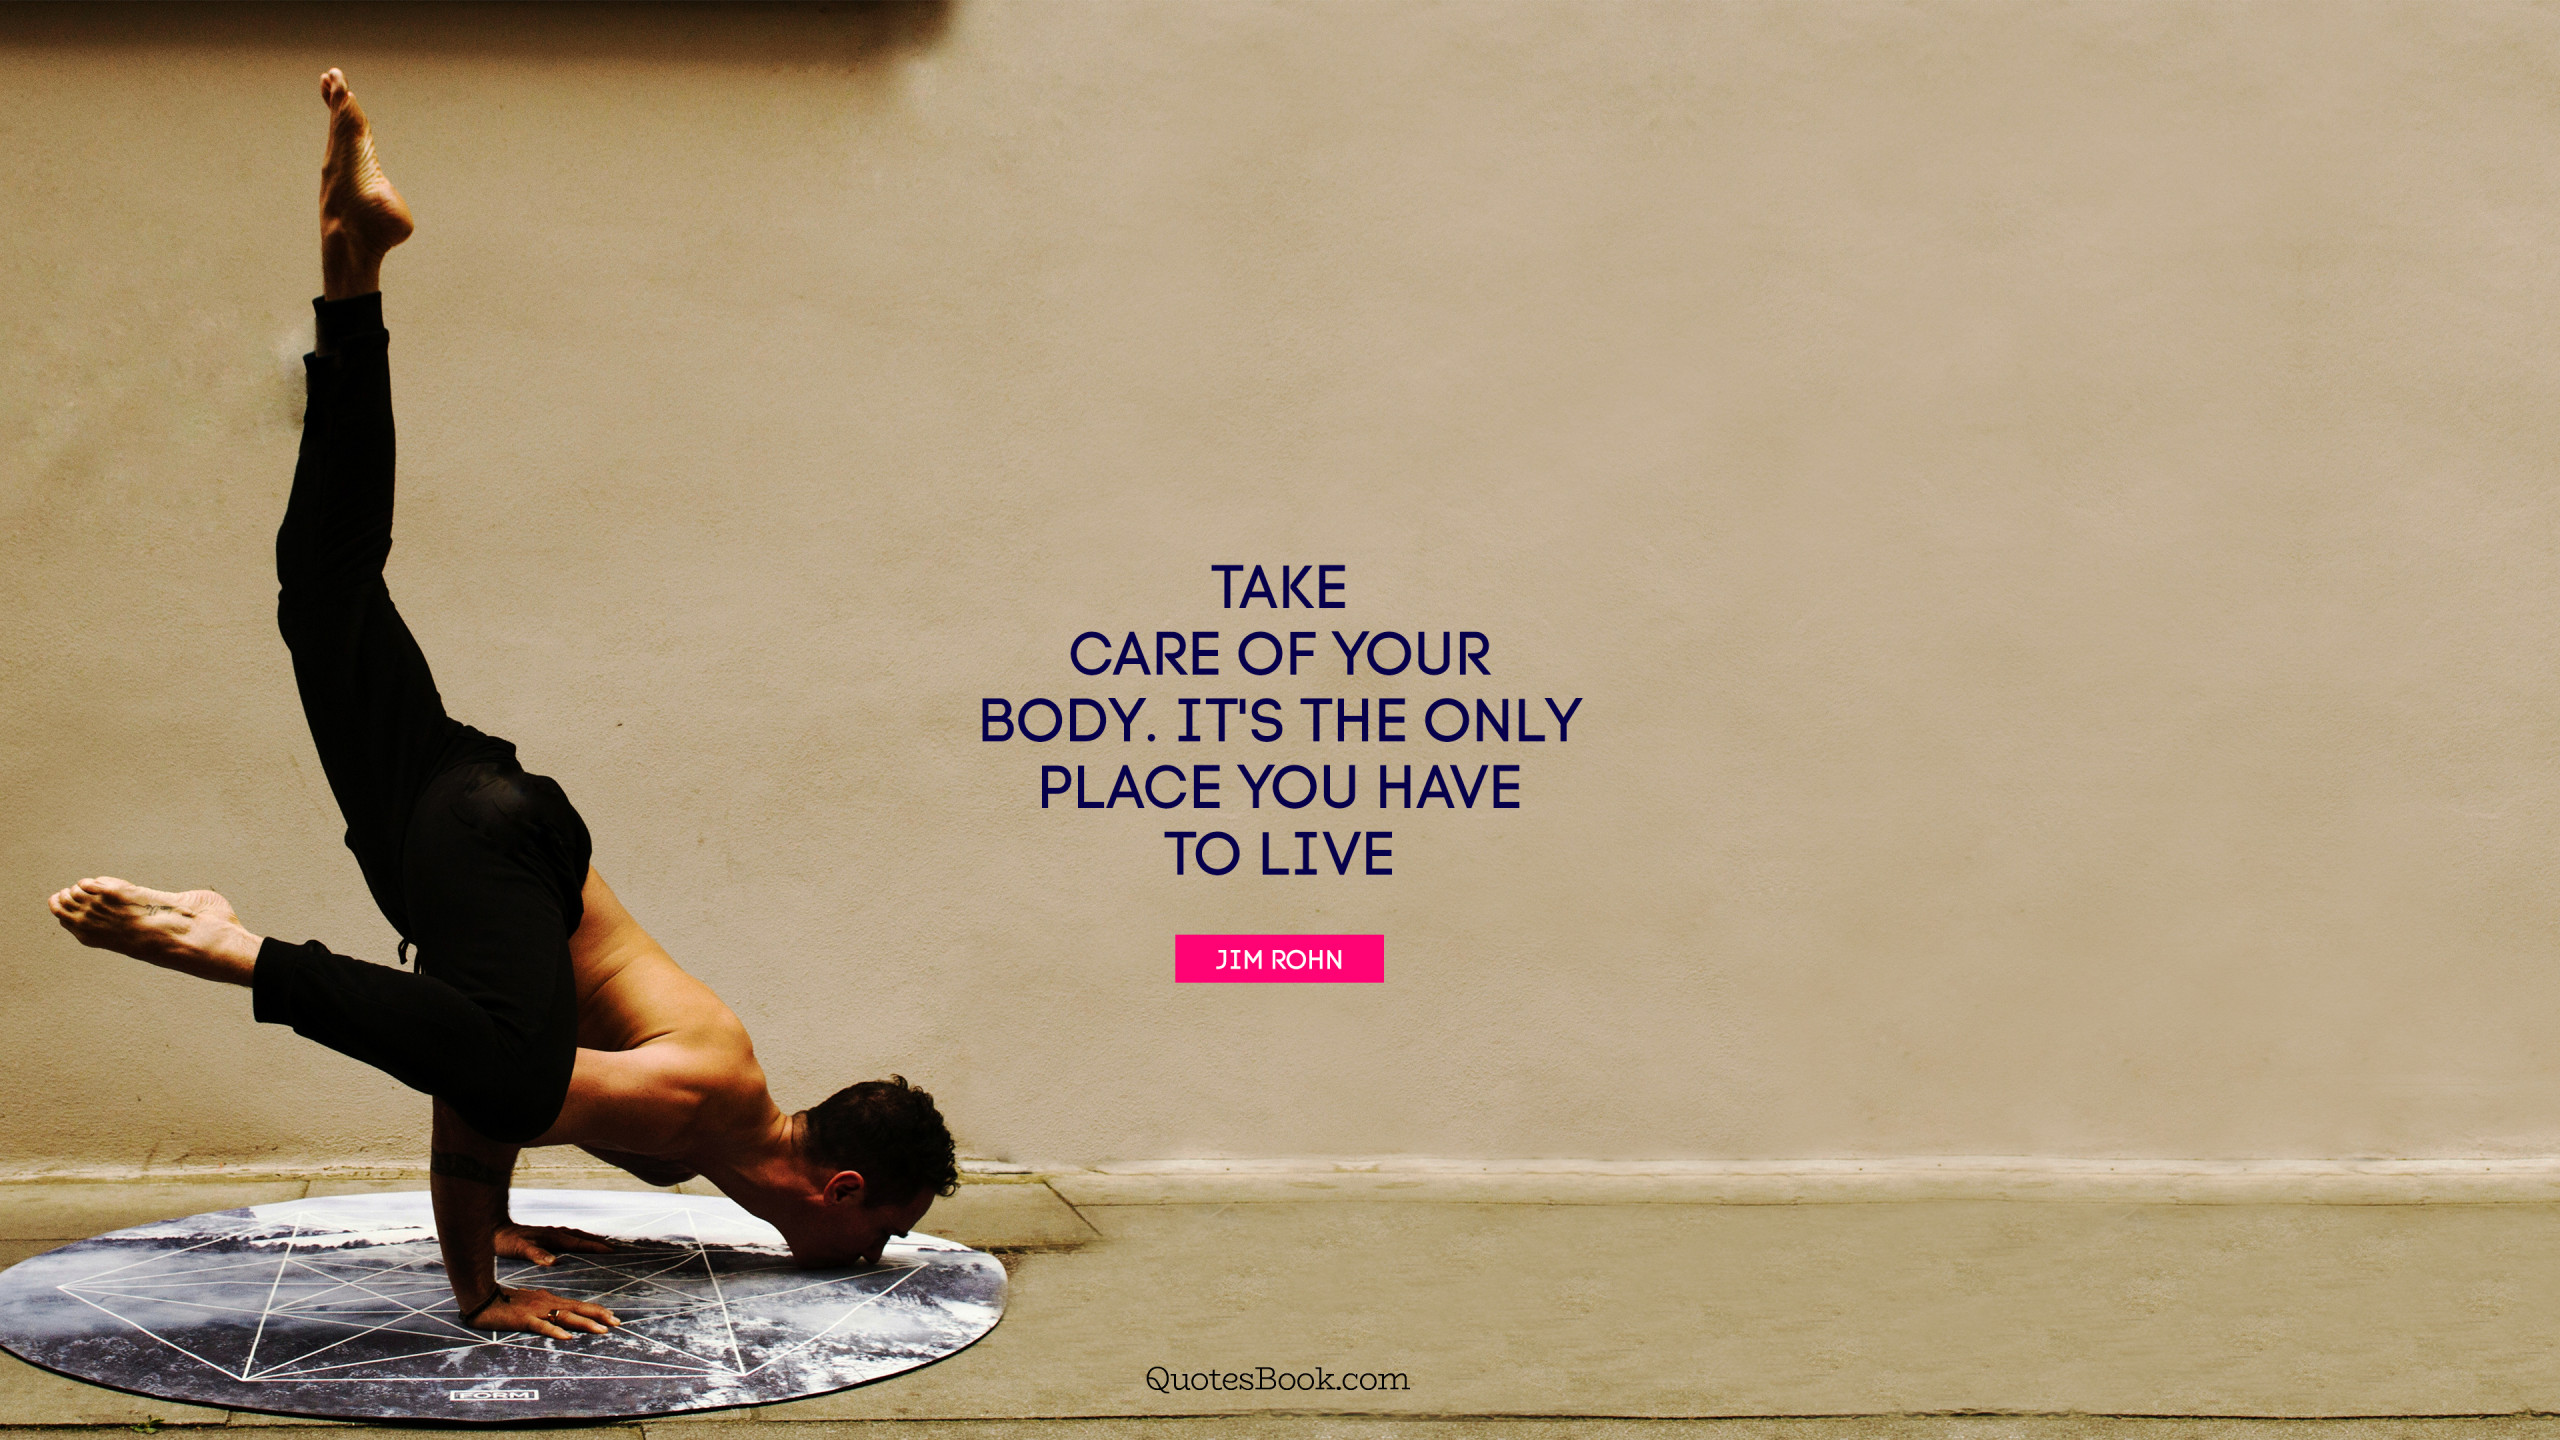 Take care of your body. It's the only place you have to live. - Quote